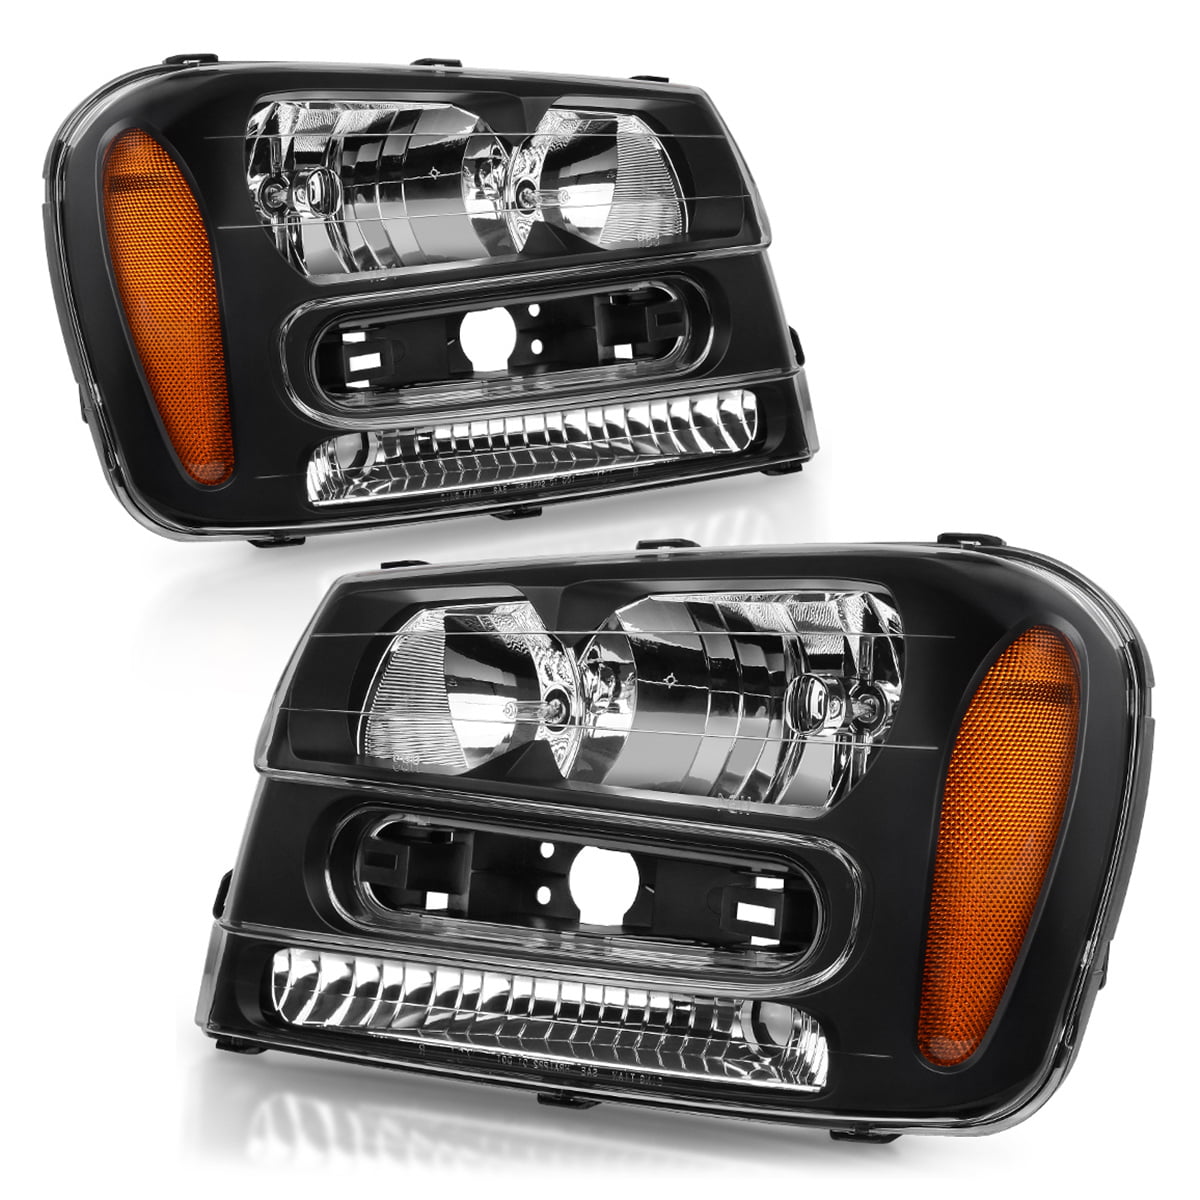 Chrome Housing Amber Corner Full Length Grill Bar Model Driver and Passenger Side Factory Style Headlights Assembly Compatible with Chevy Trailblazer/Trailblazer EXT 02-09 